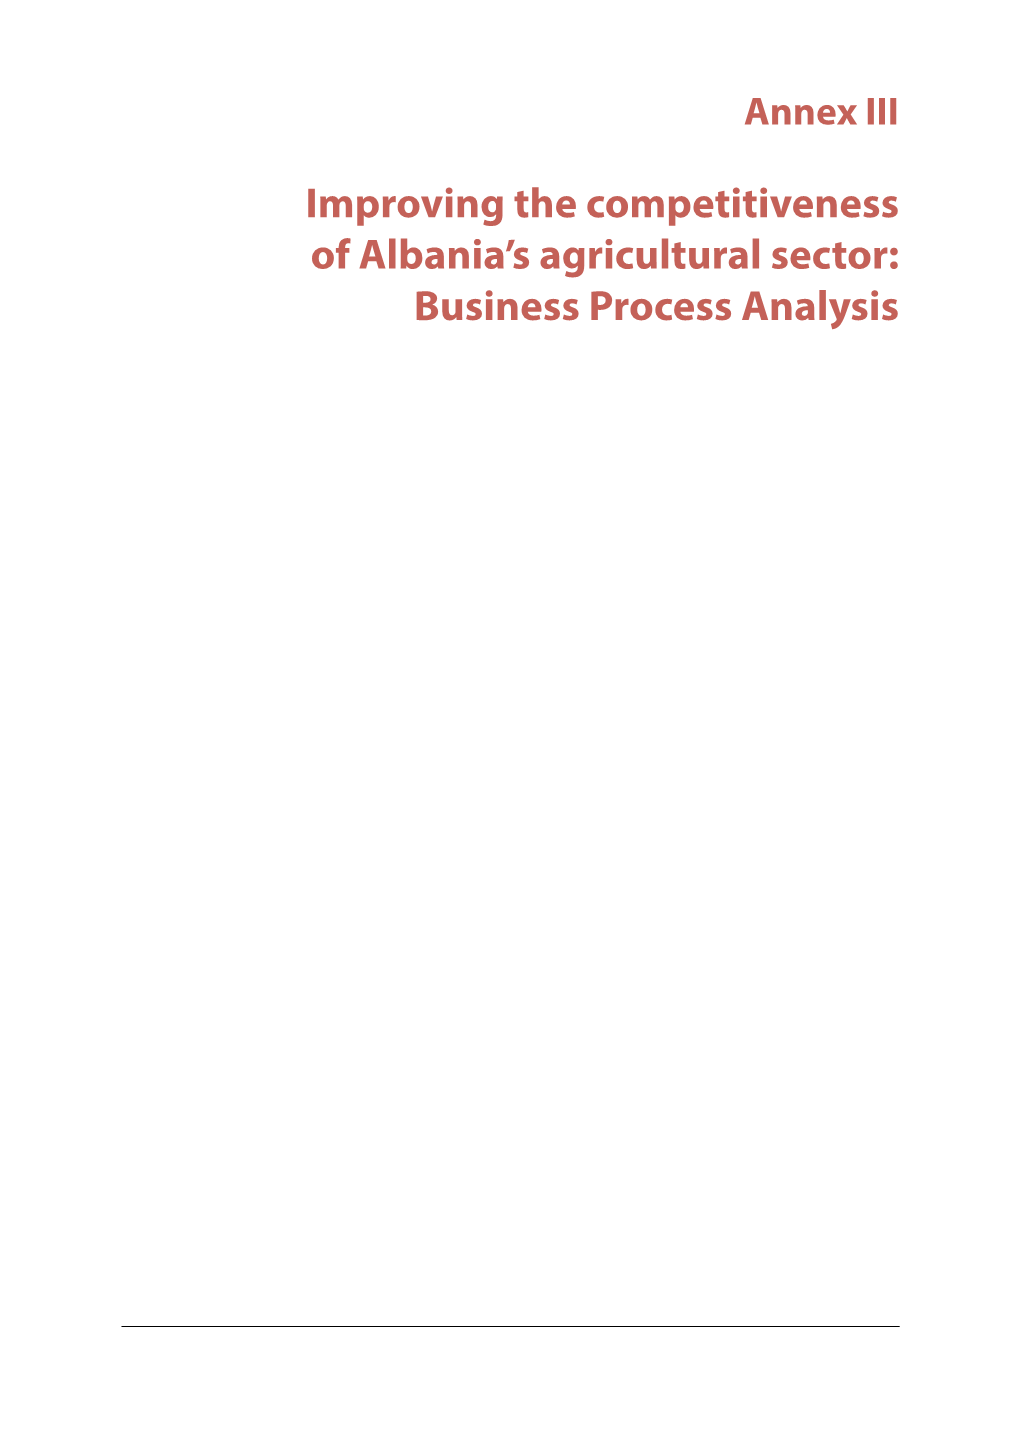 Improving the Competitiveness of Albania's Agricultural Sector